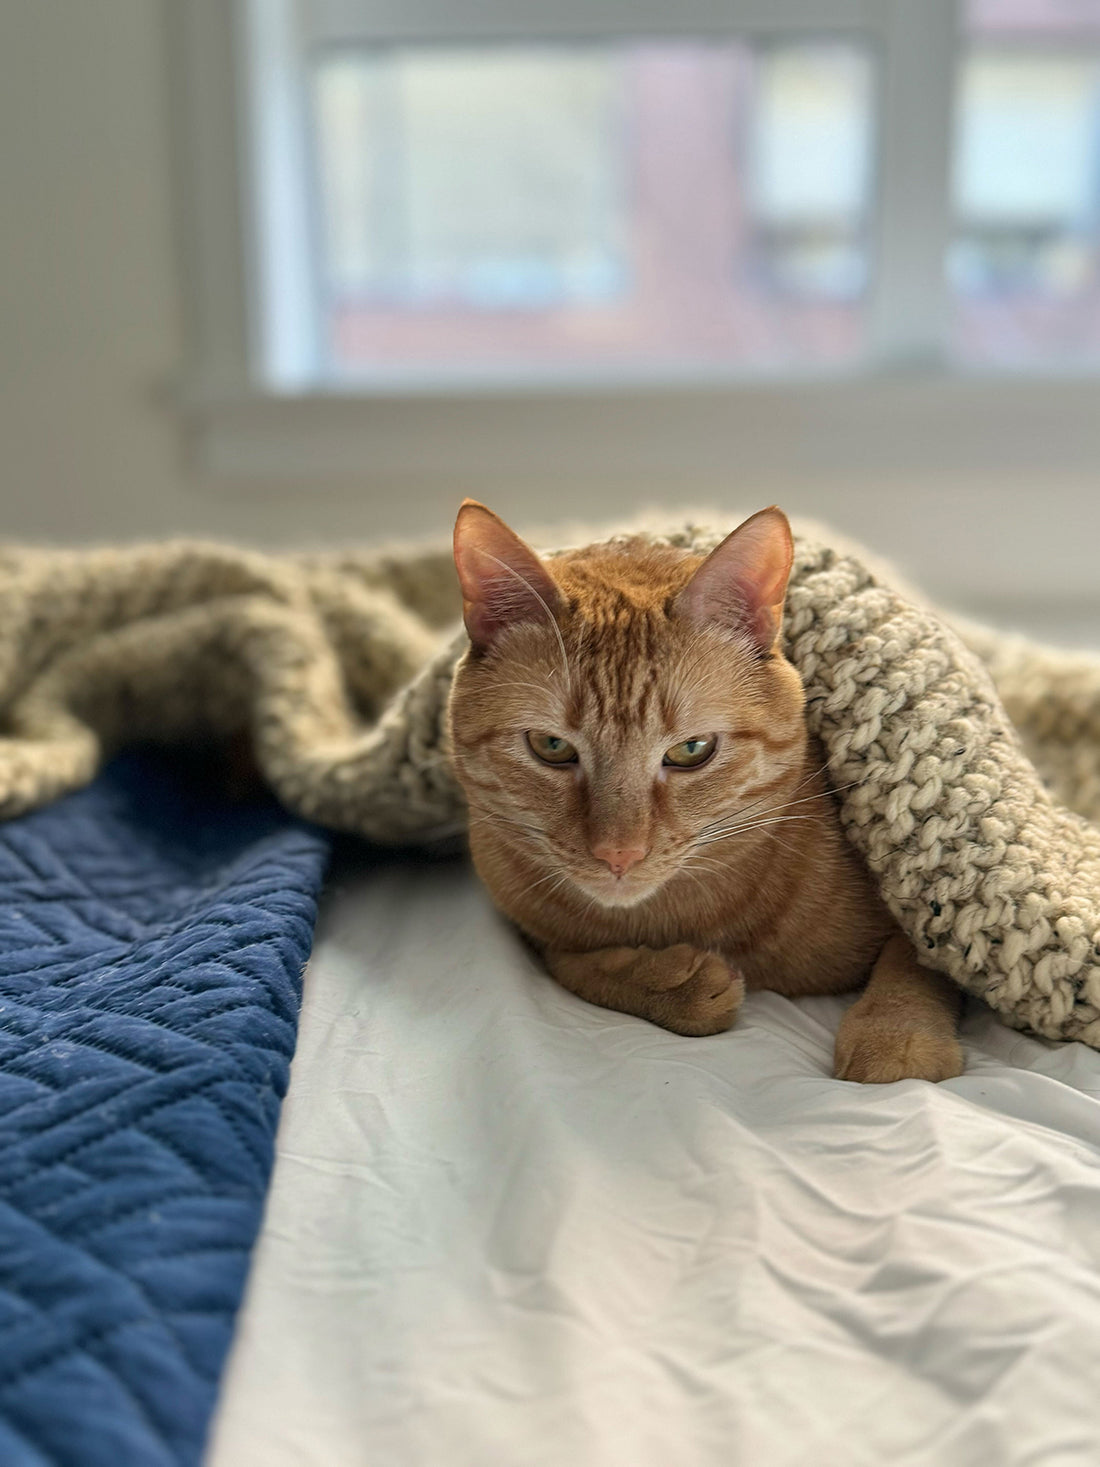 Cozy DIY: Matching Throw Blankets for You and Your Cat